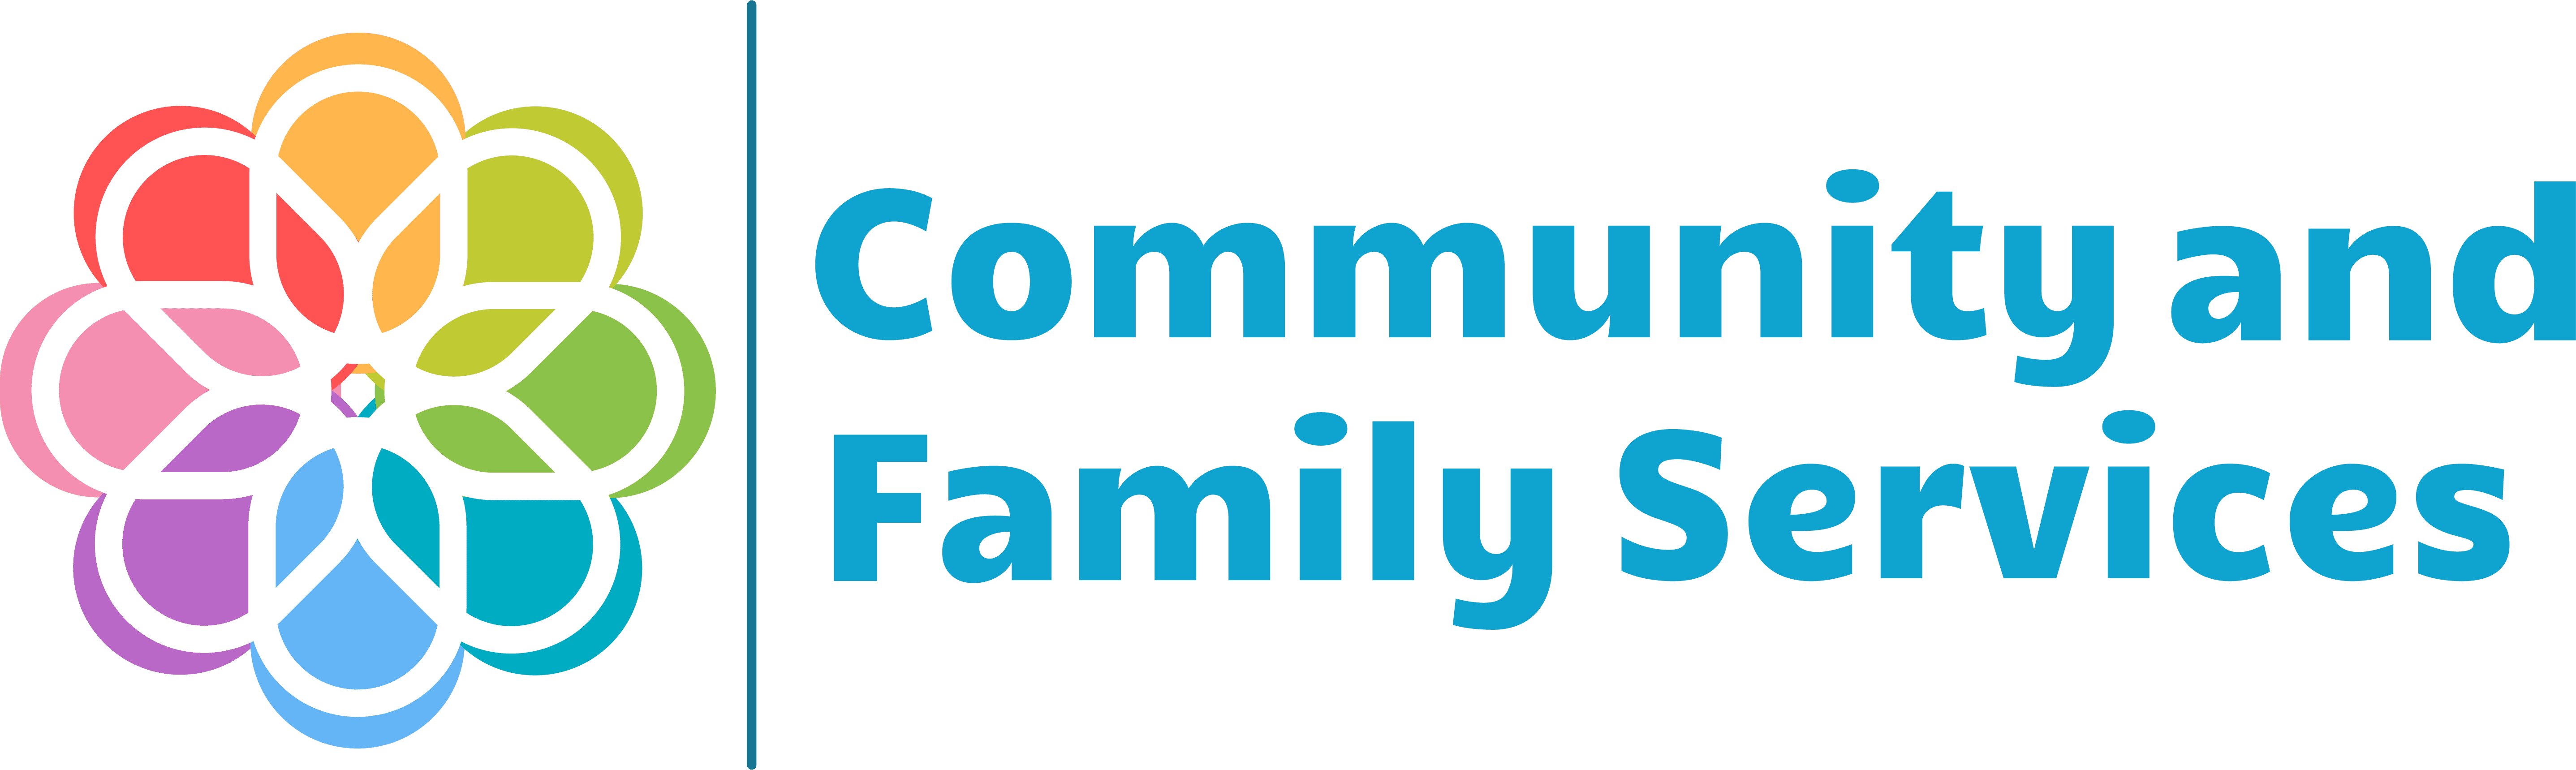 Community and Family Service